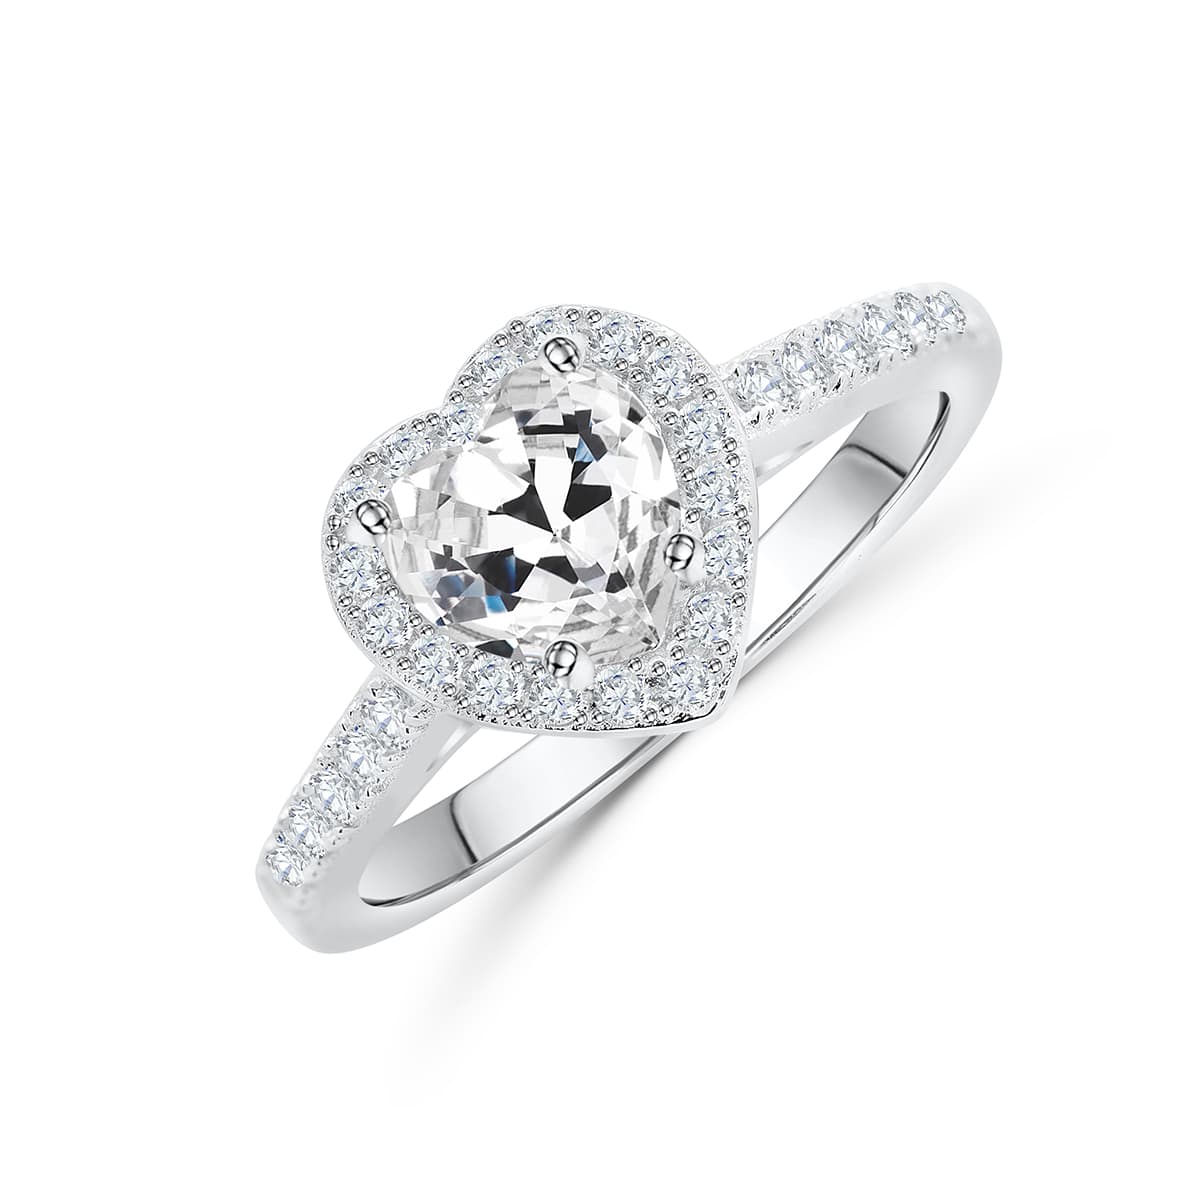 the sweetheart heart shaped halo engagement ring